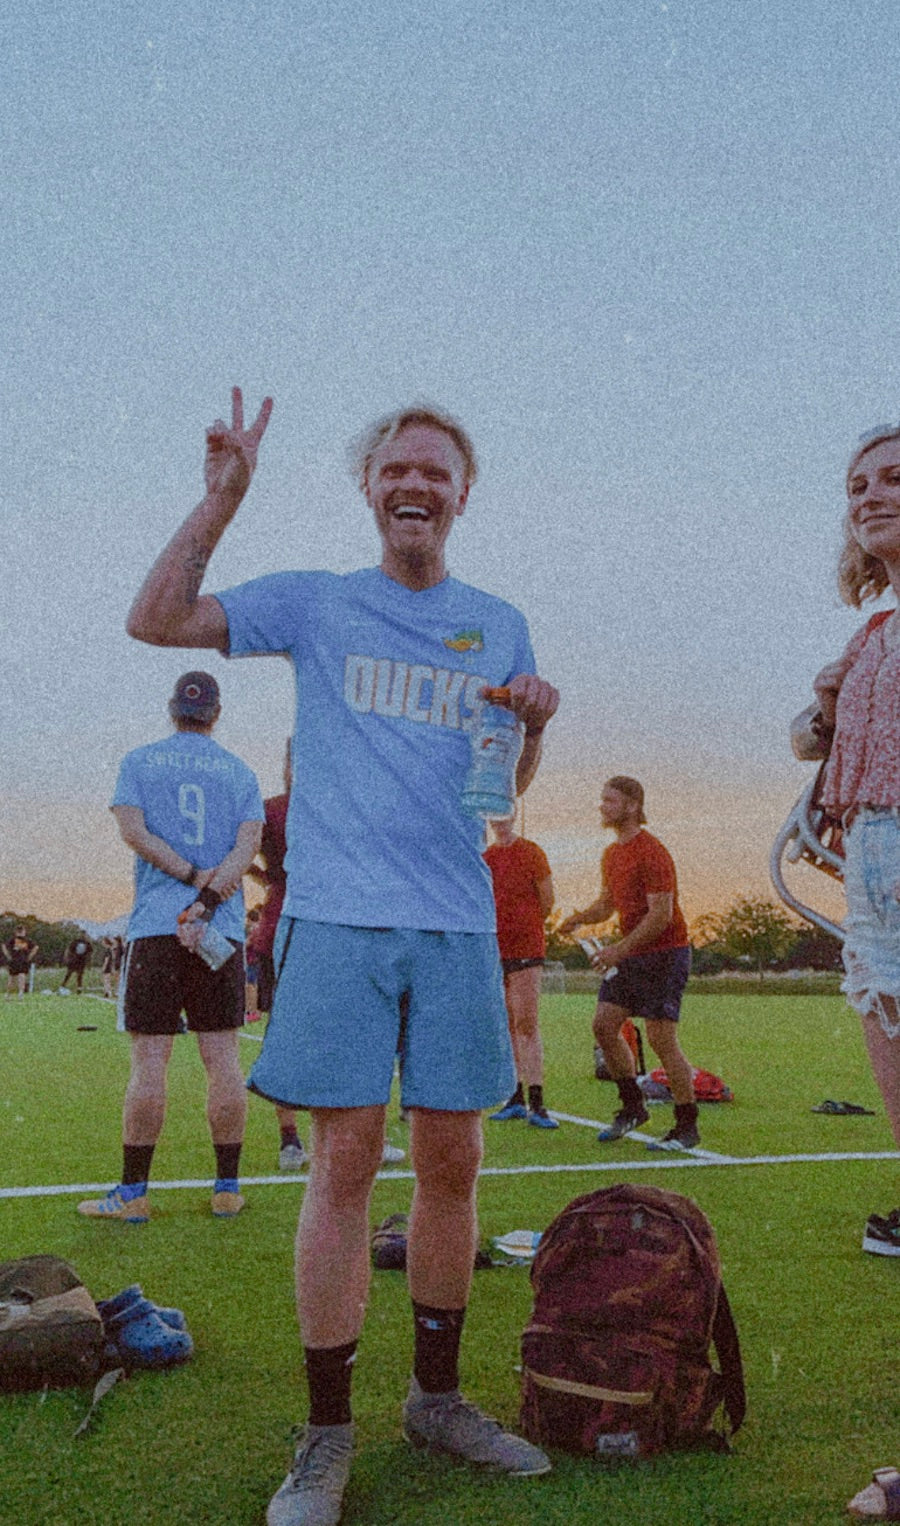 Guy making a peace sign as he plays soccer with his friends at an outdoor field.